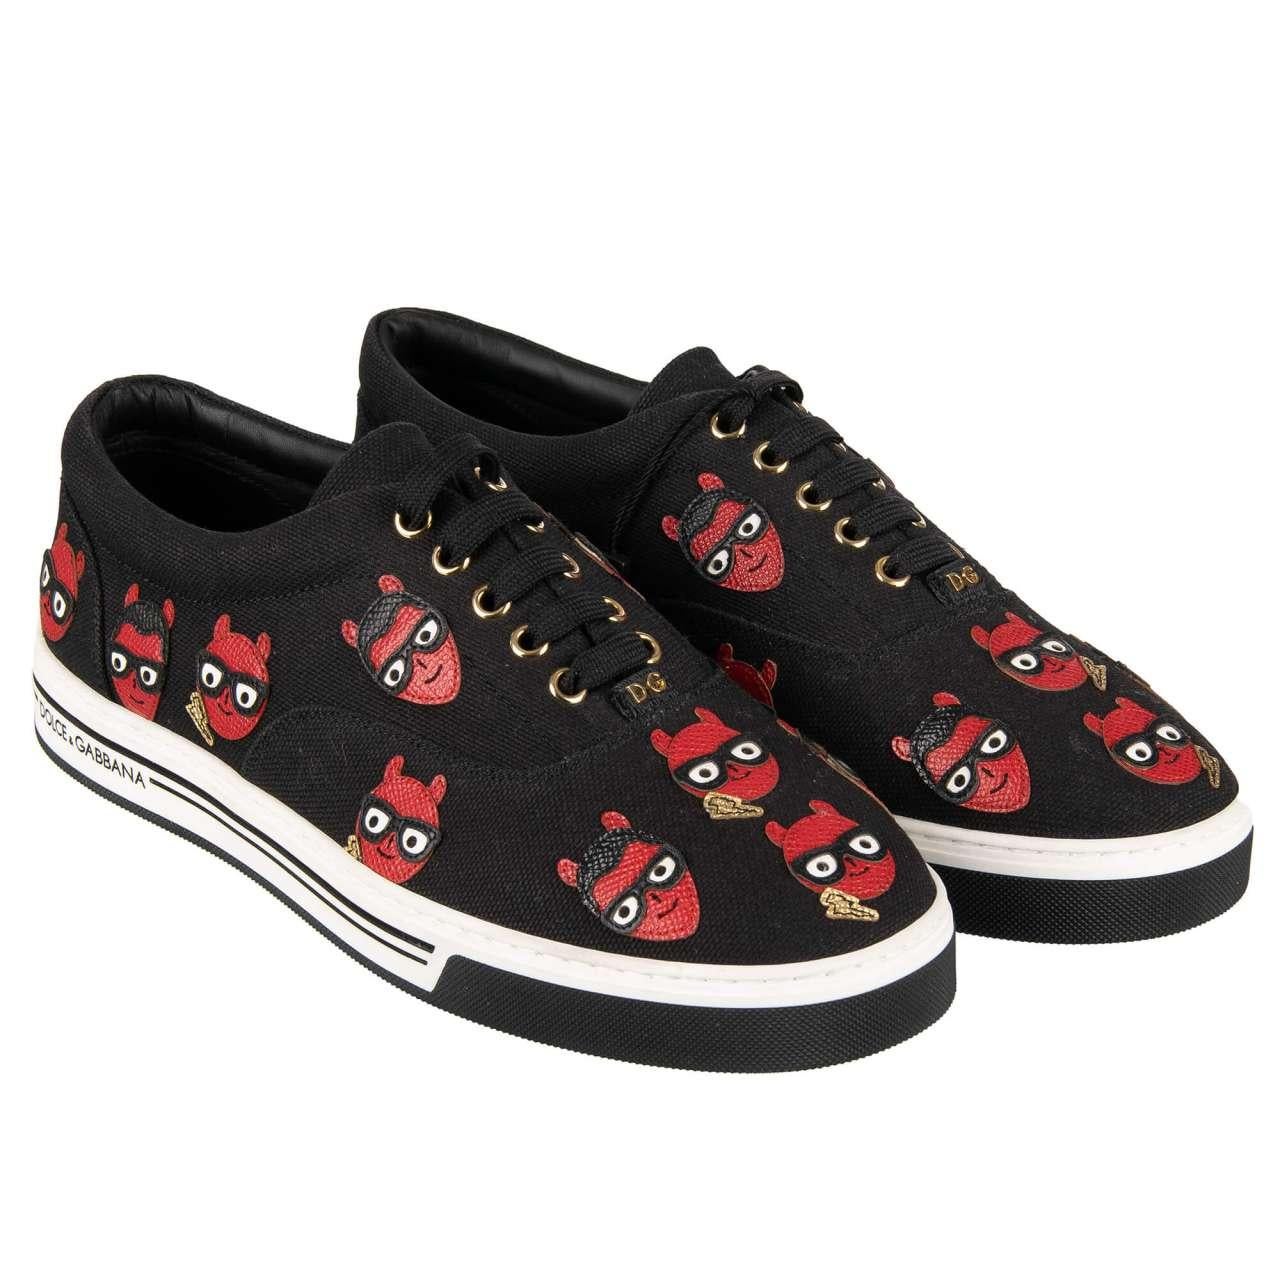 D&G Low-Top Canvas Sneaker ROMA with Leather Embroidery Black EUR 40.5 For Sale 1